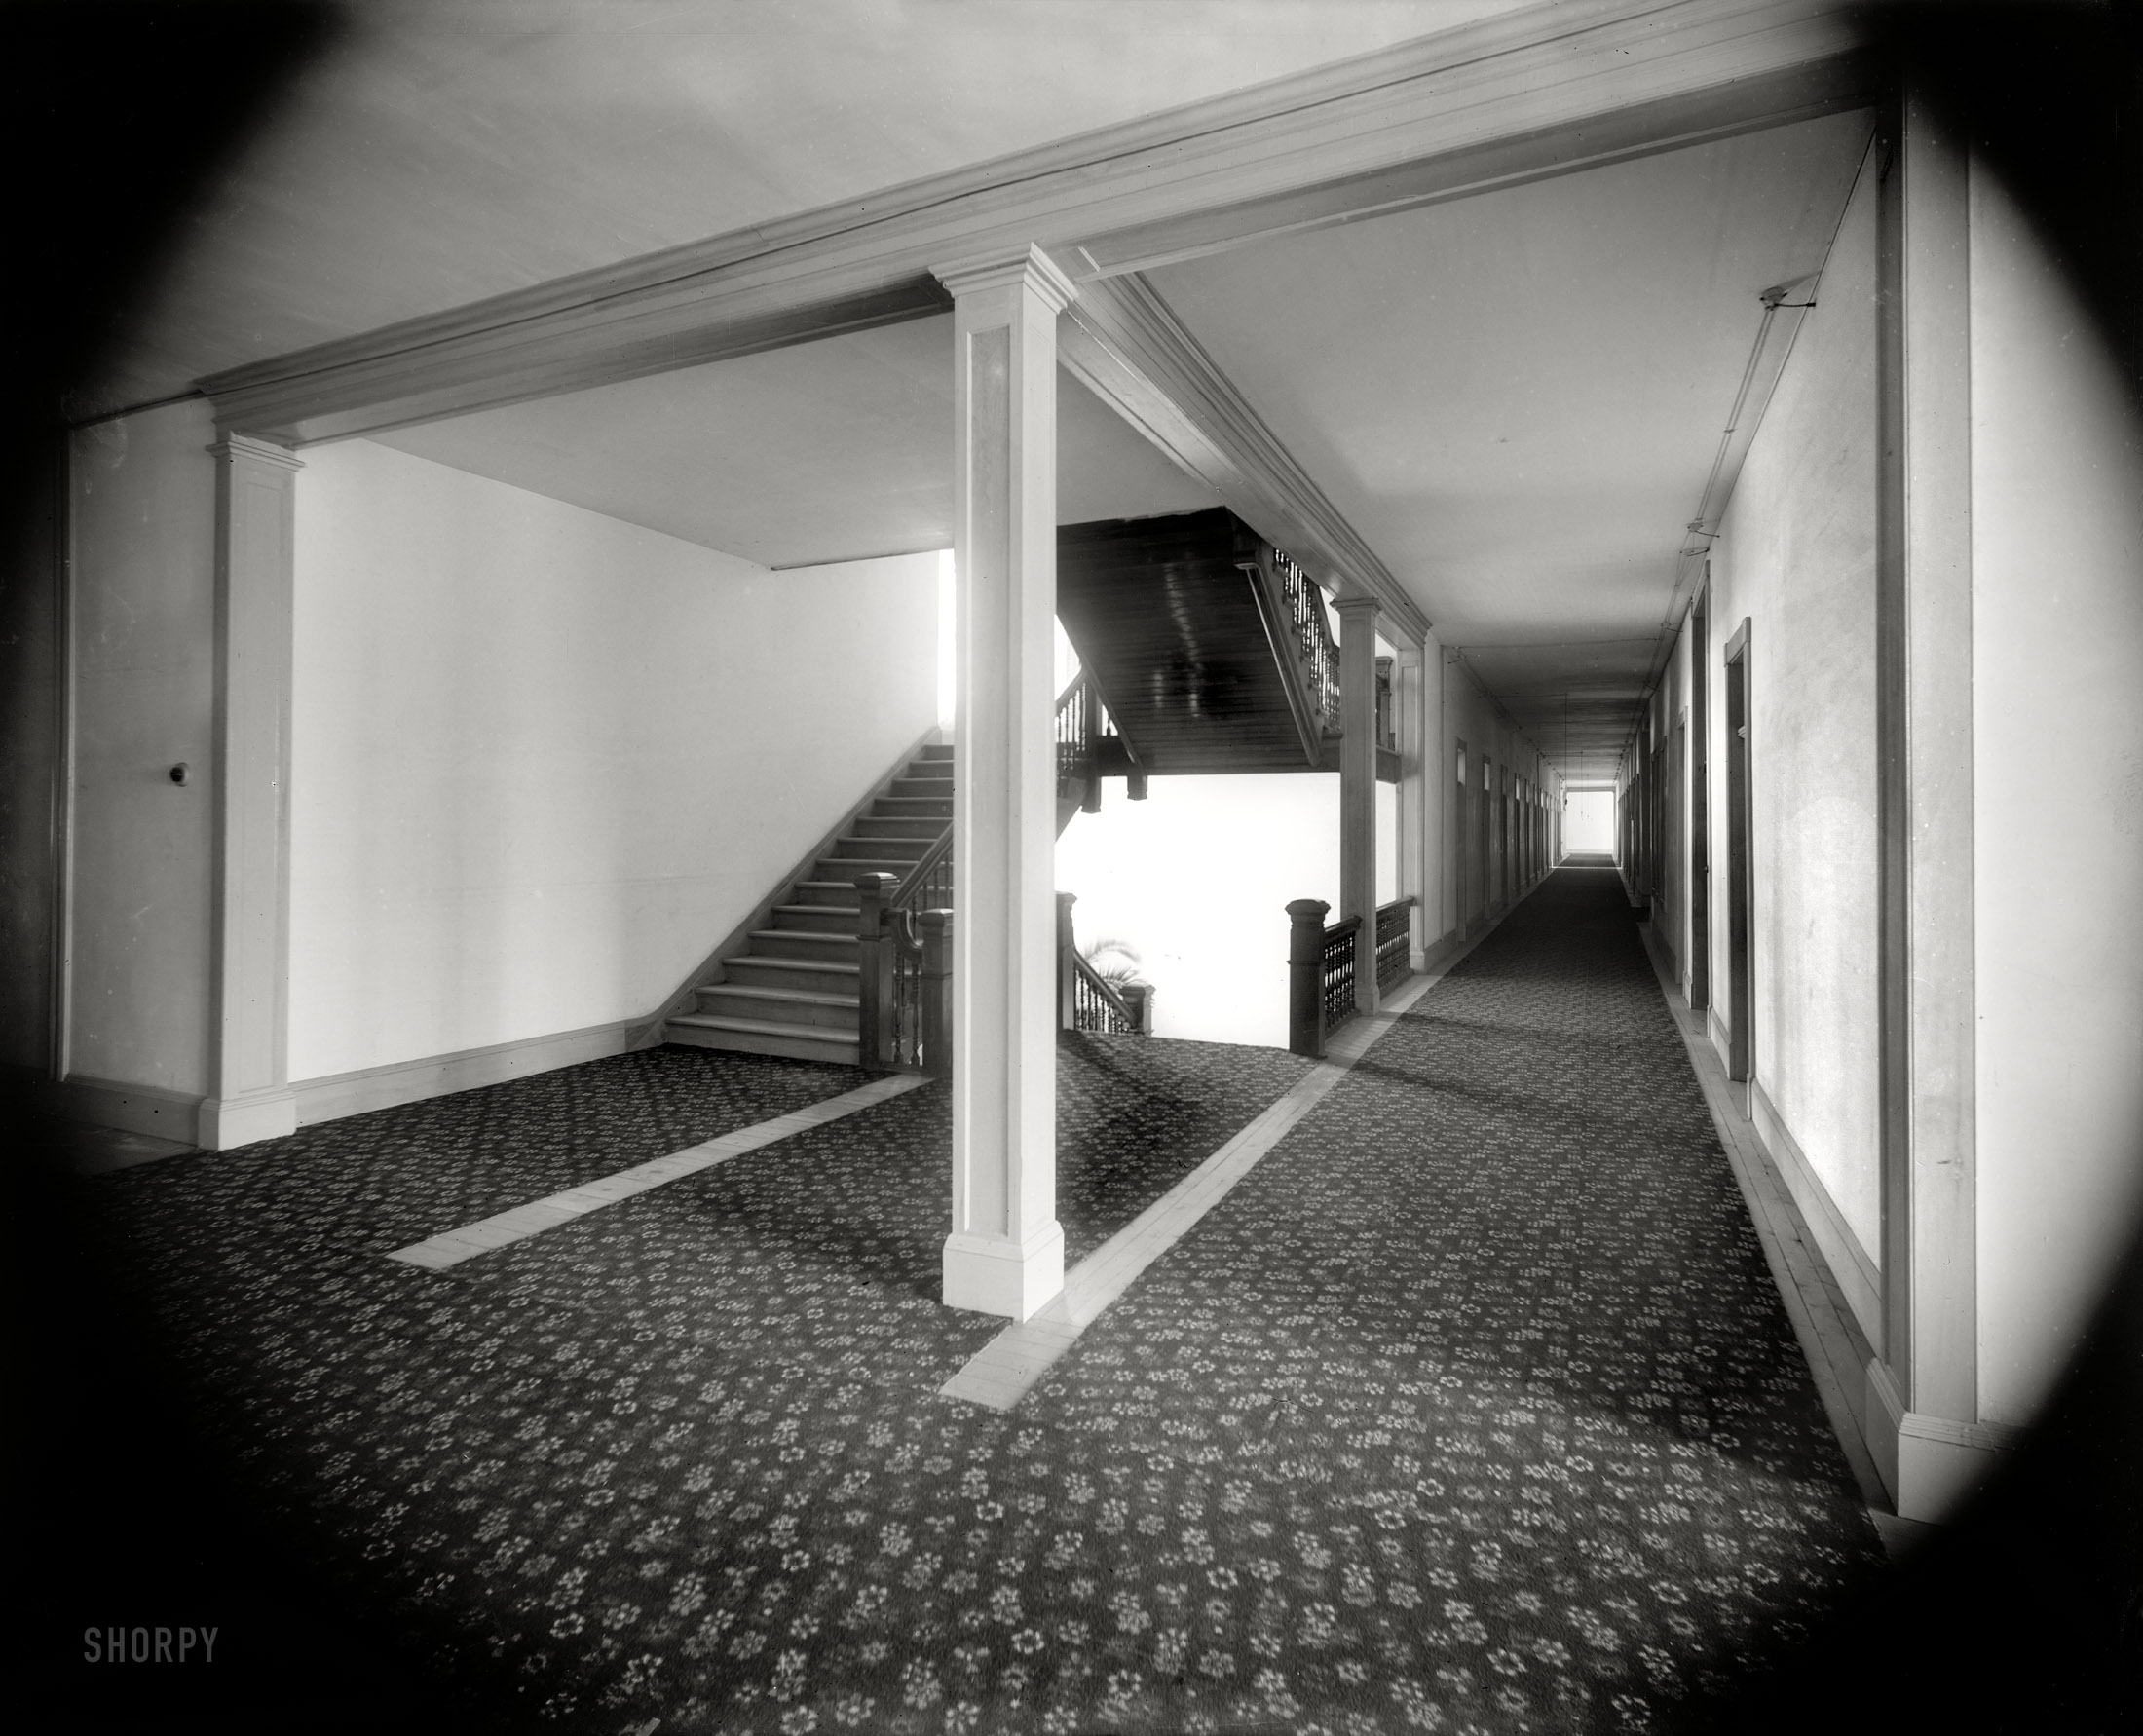 Put-In Bay, Ohio, circa 1898. "Hotel Victory corridor." A door slammed. The maid screamed. 8x10 inch glass negative, Detroit Publishing Co. View full size.